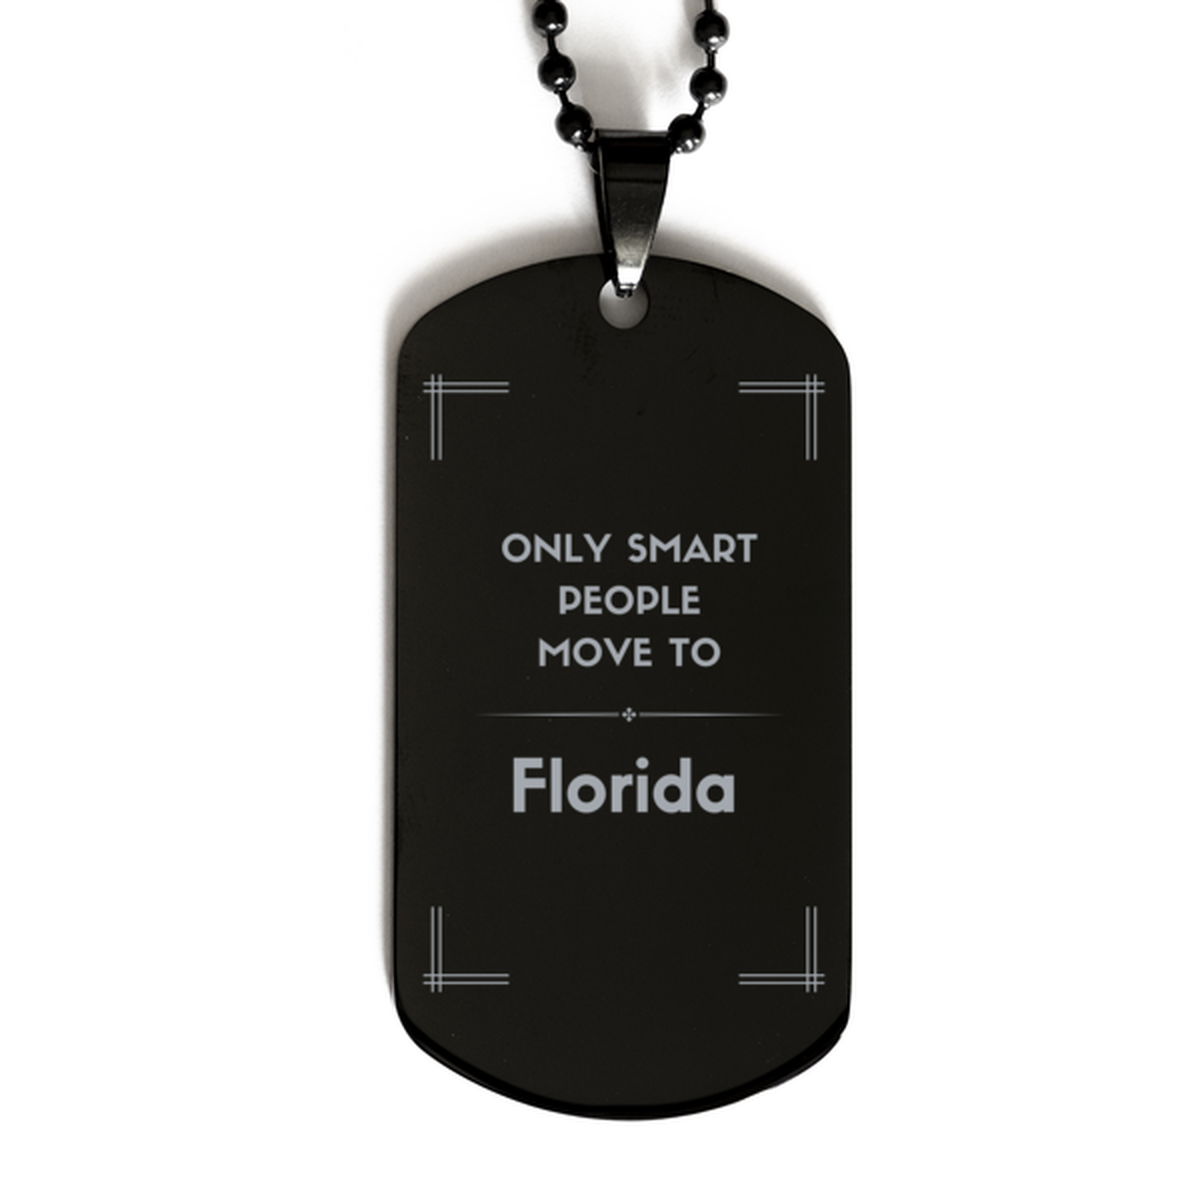 Only smart people move to Florida Black Dog Tag, Gag Gifts For Florida, Move to Florida Gifts for Friends Coworker Funny Saying Quote